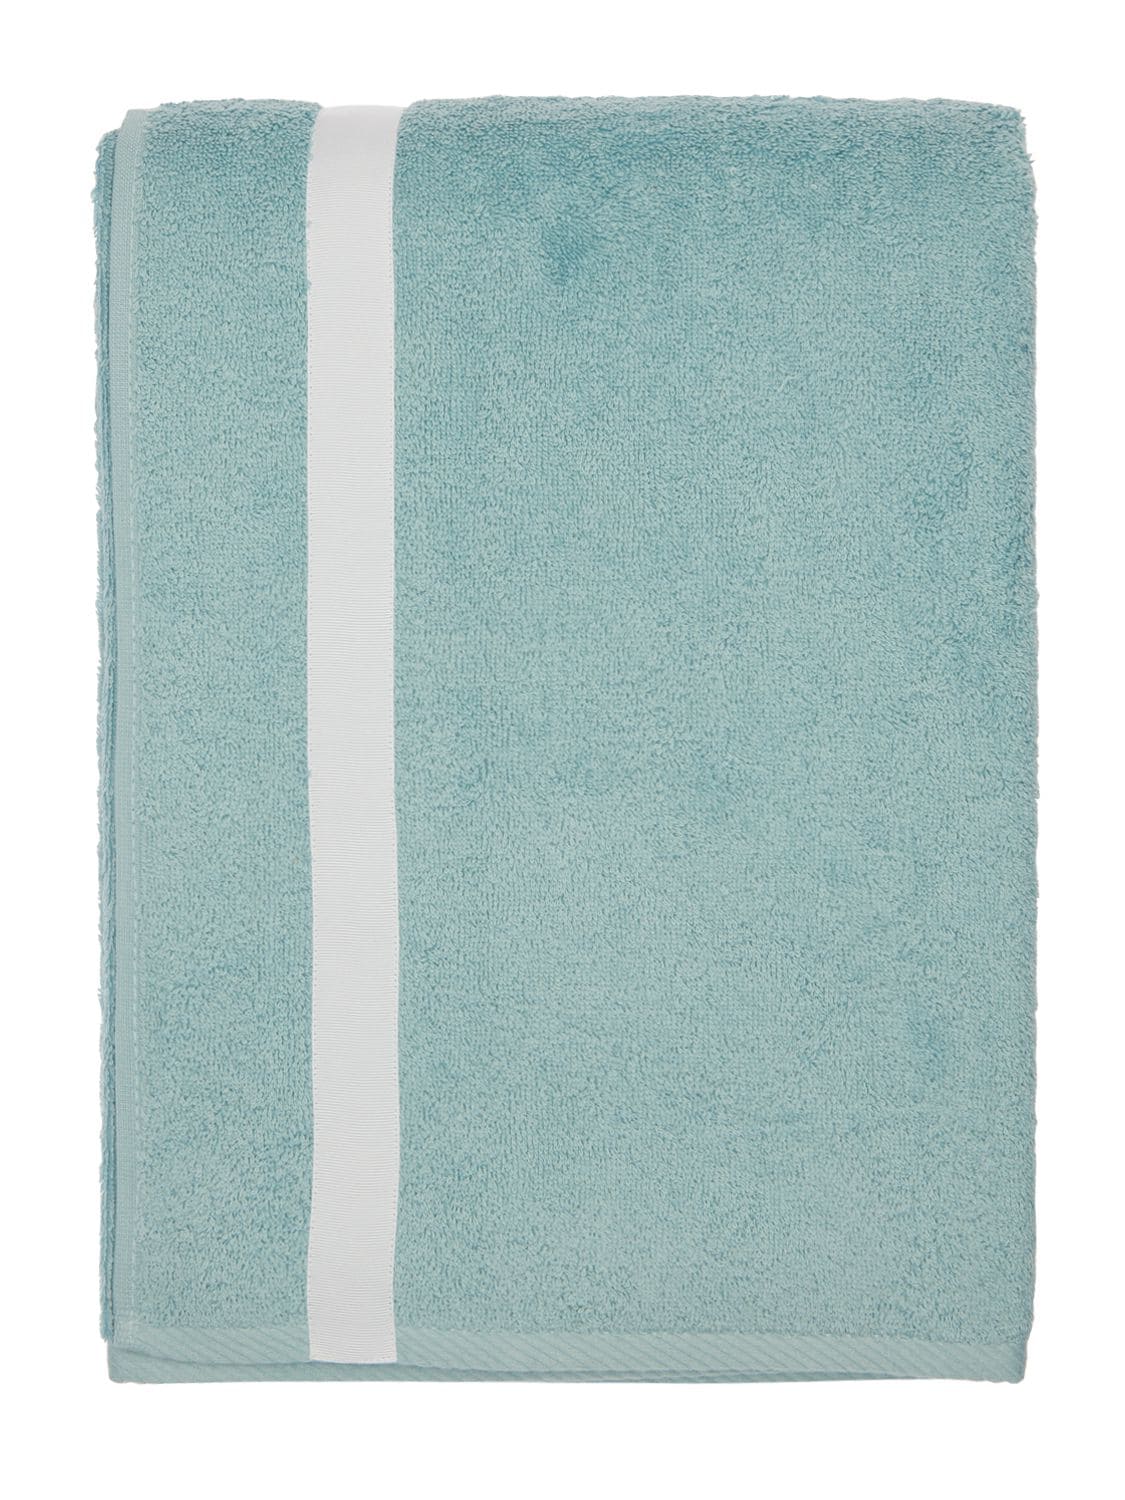 Alessandro Di Marco Cotton Terrycloth Bath Towel In Blue,white